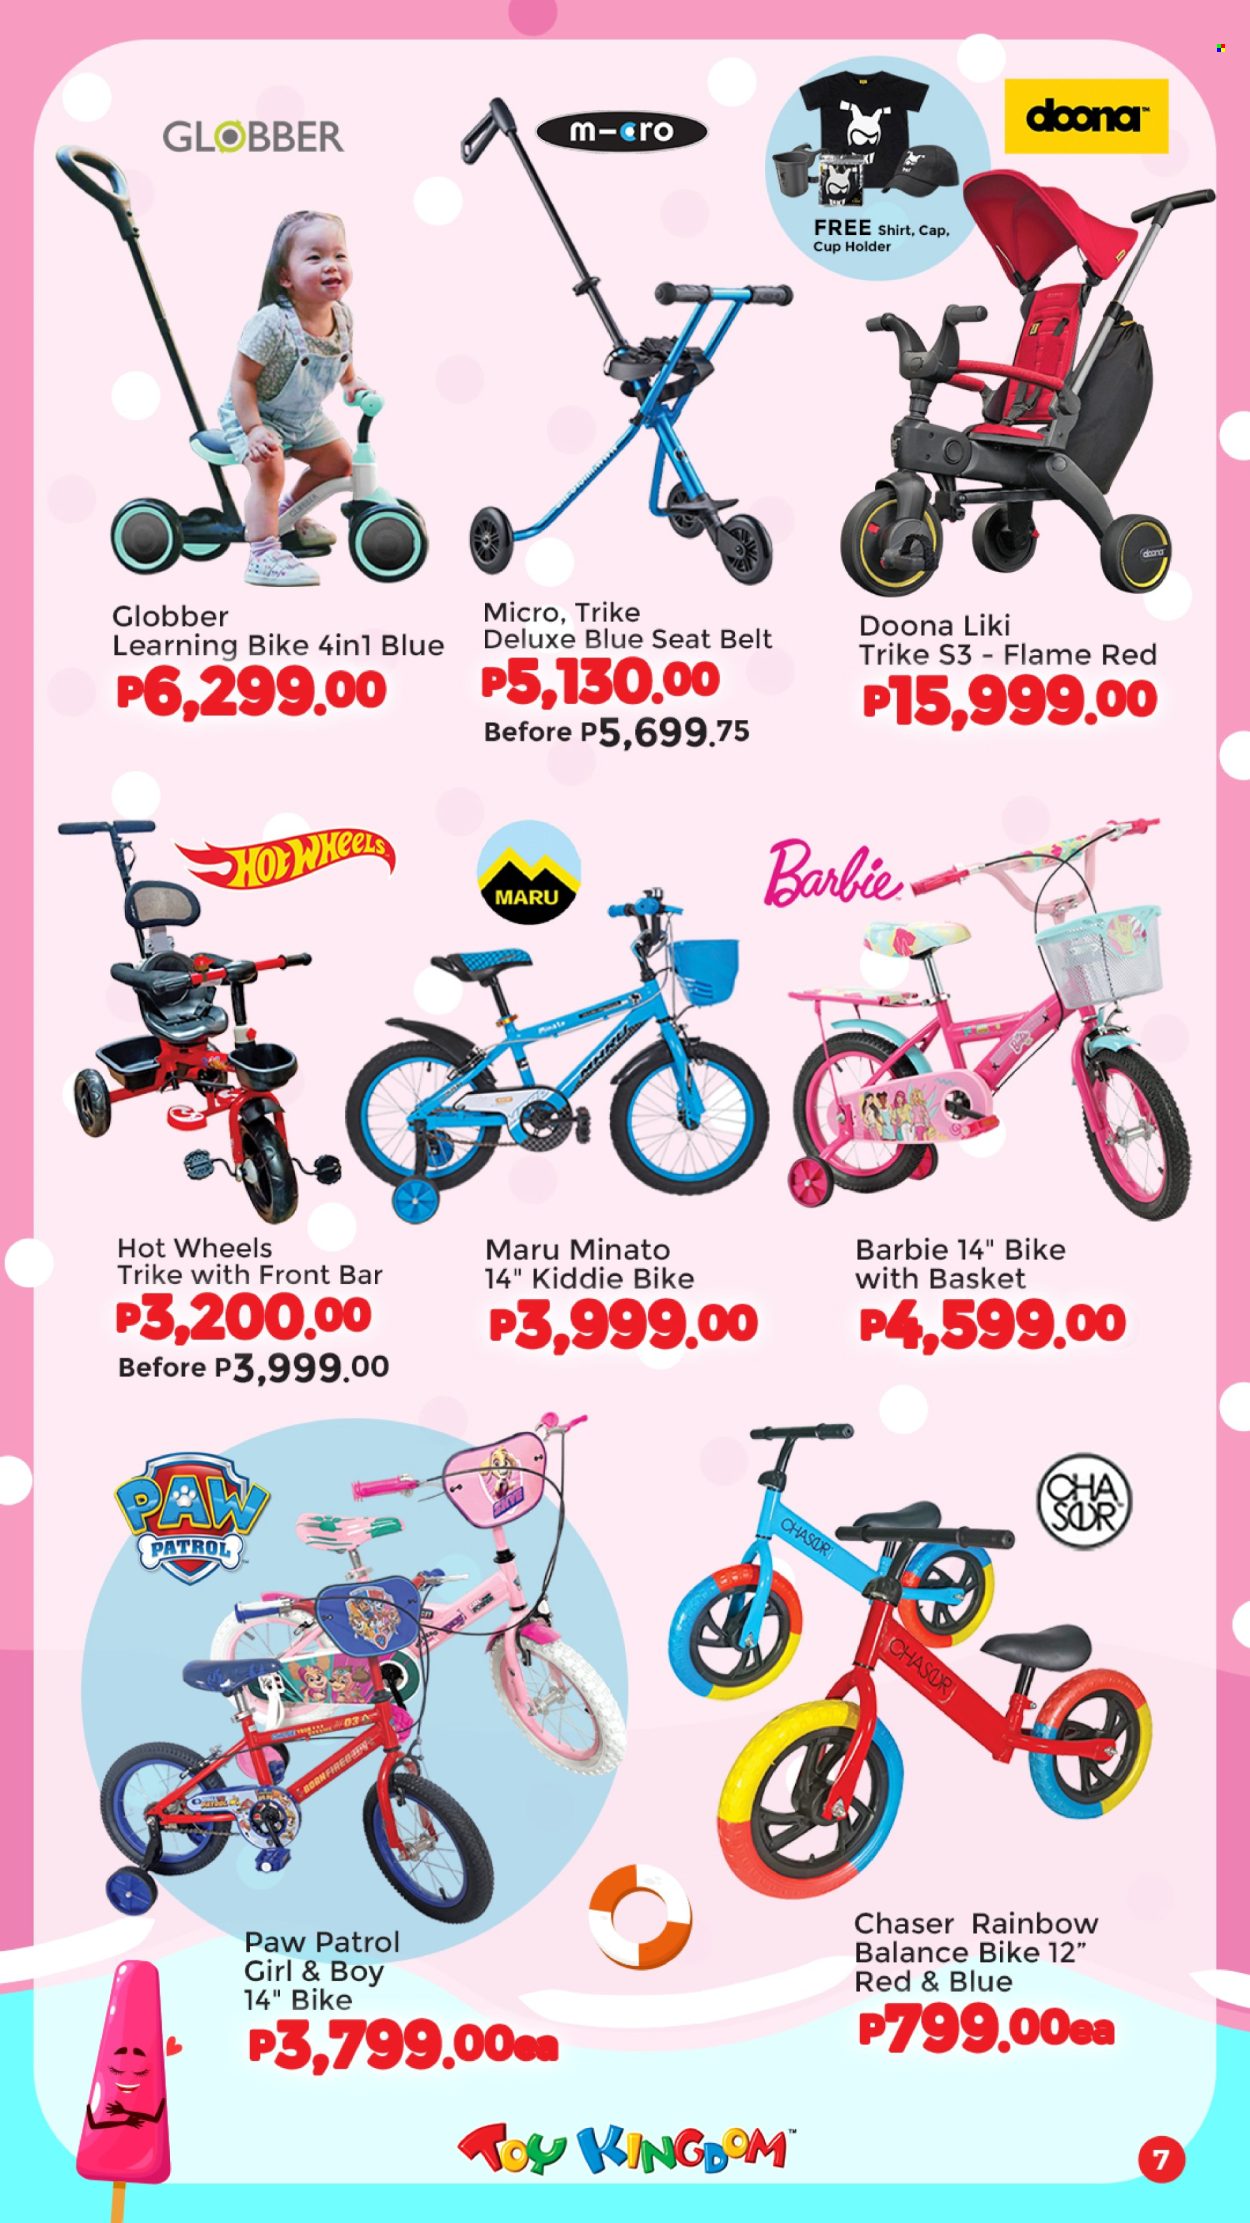 thumbnail - Toy Kingdom offer  - Sales products - Hot Wheels, Barbie, holder, bicycle, Paw Patrol, toys. Page 7.